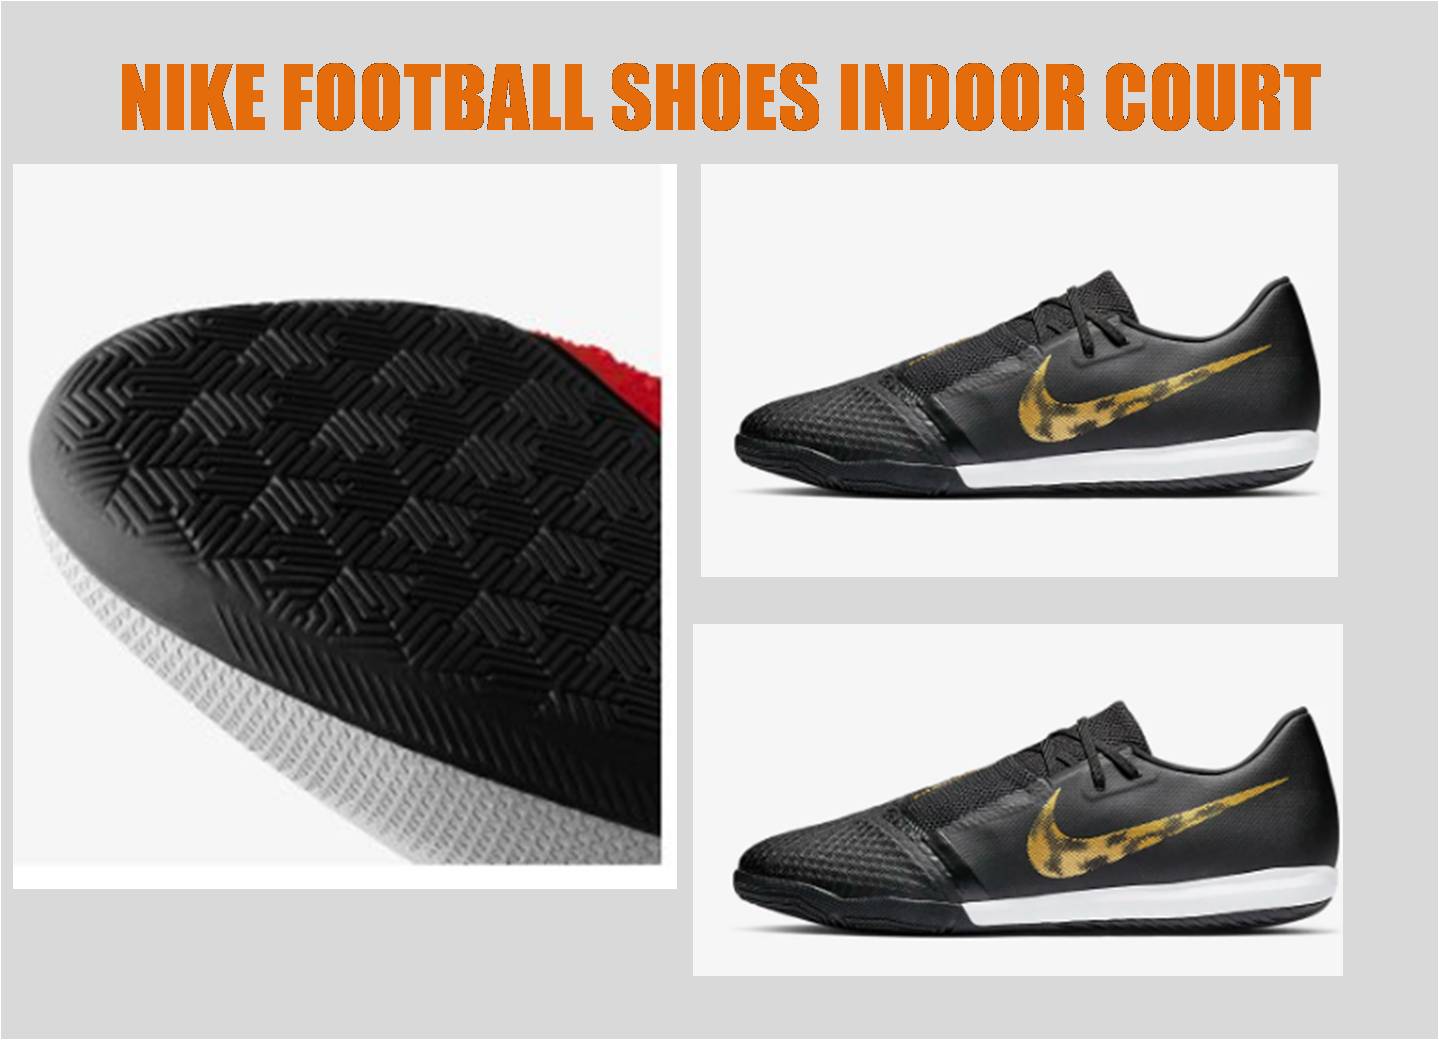 NIKE_FOOTBALL_SHOES_FOR_INDOOR_COURT